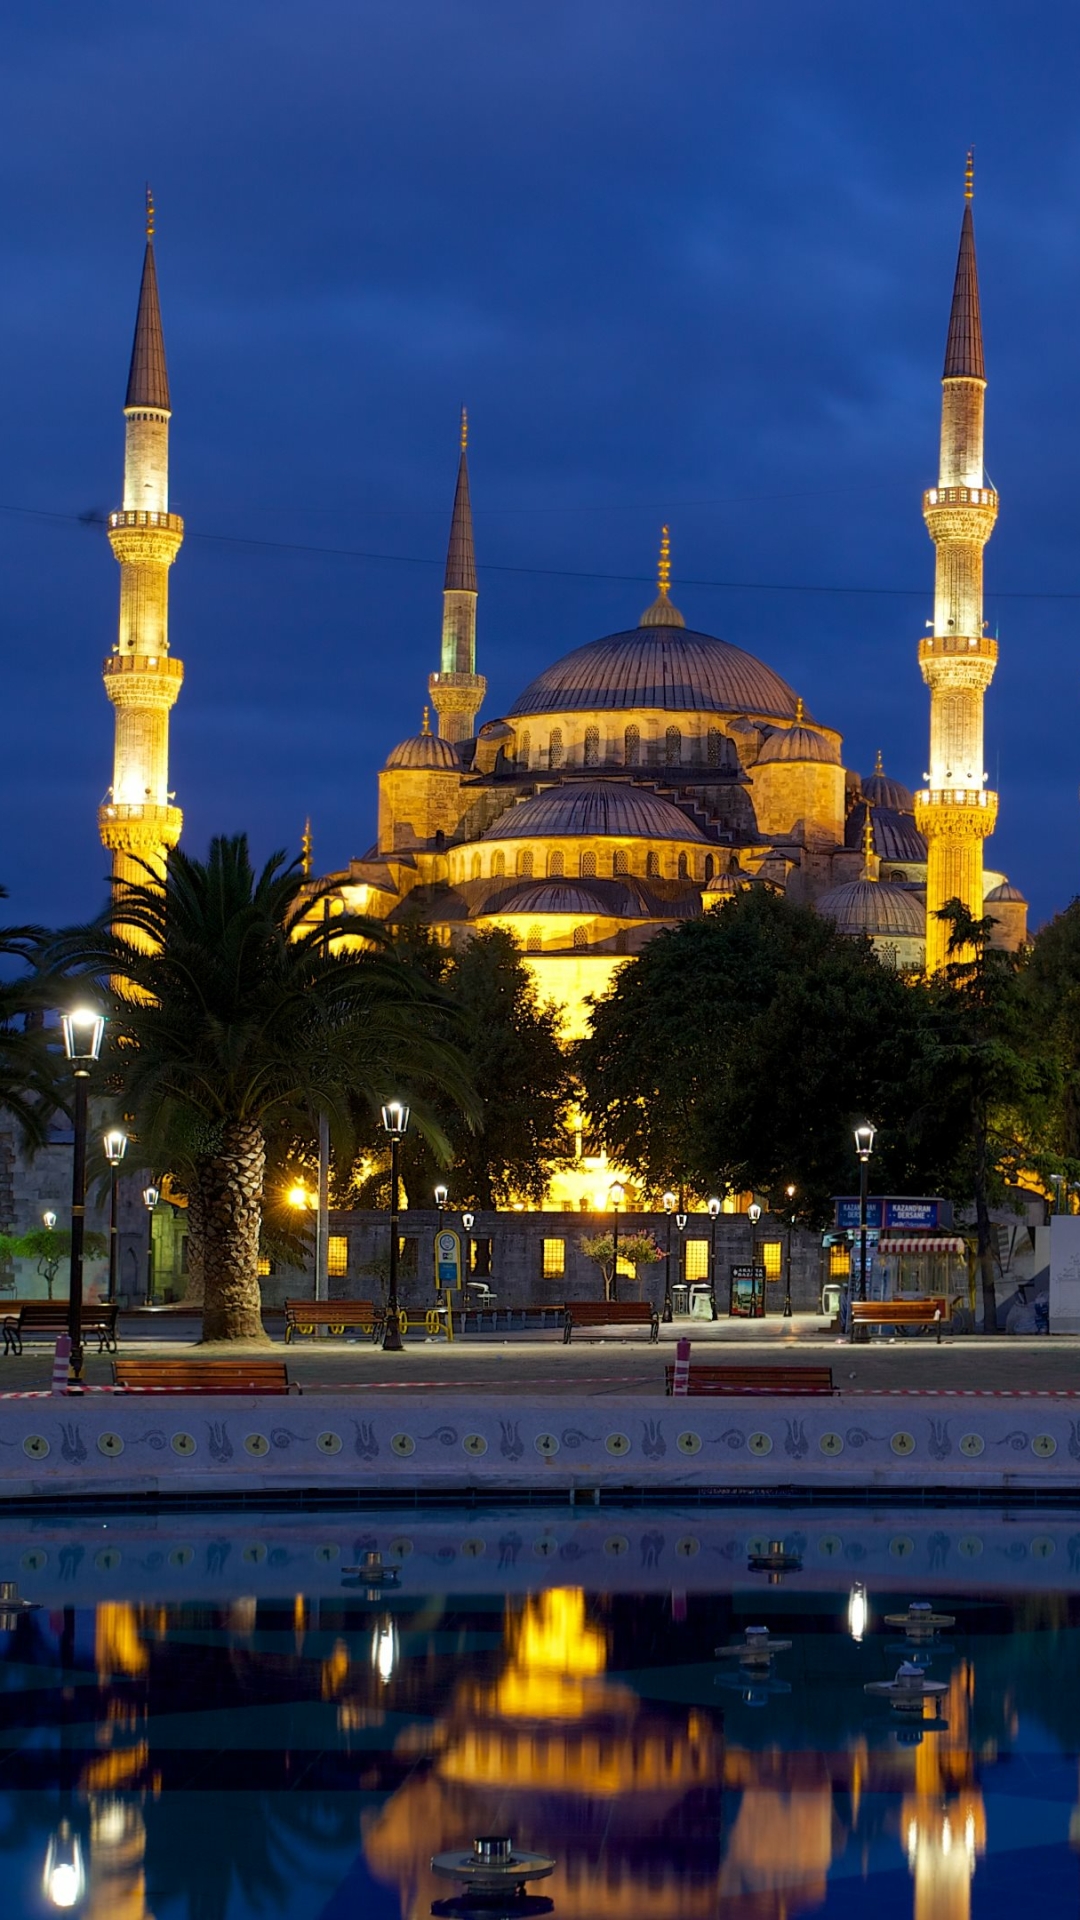 Night view of blue mosque